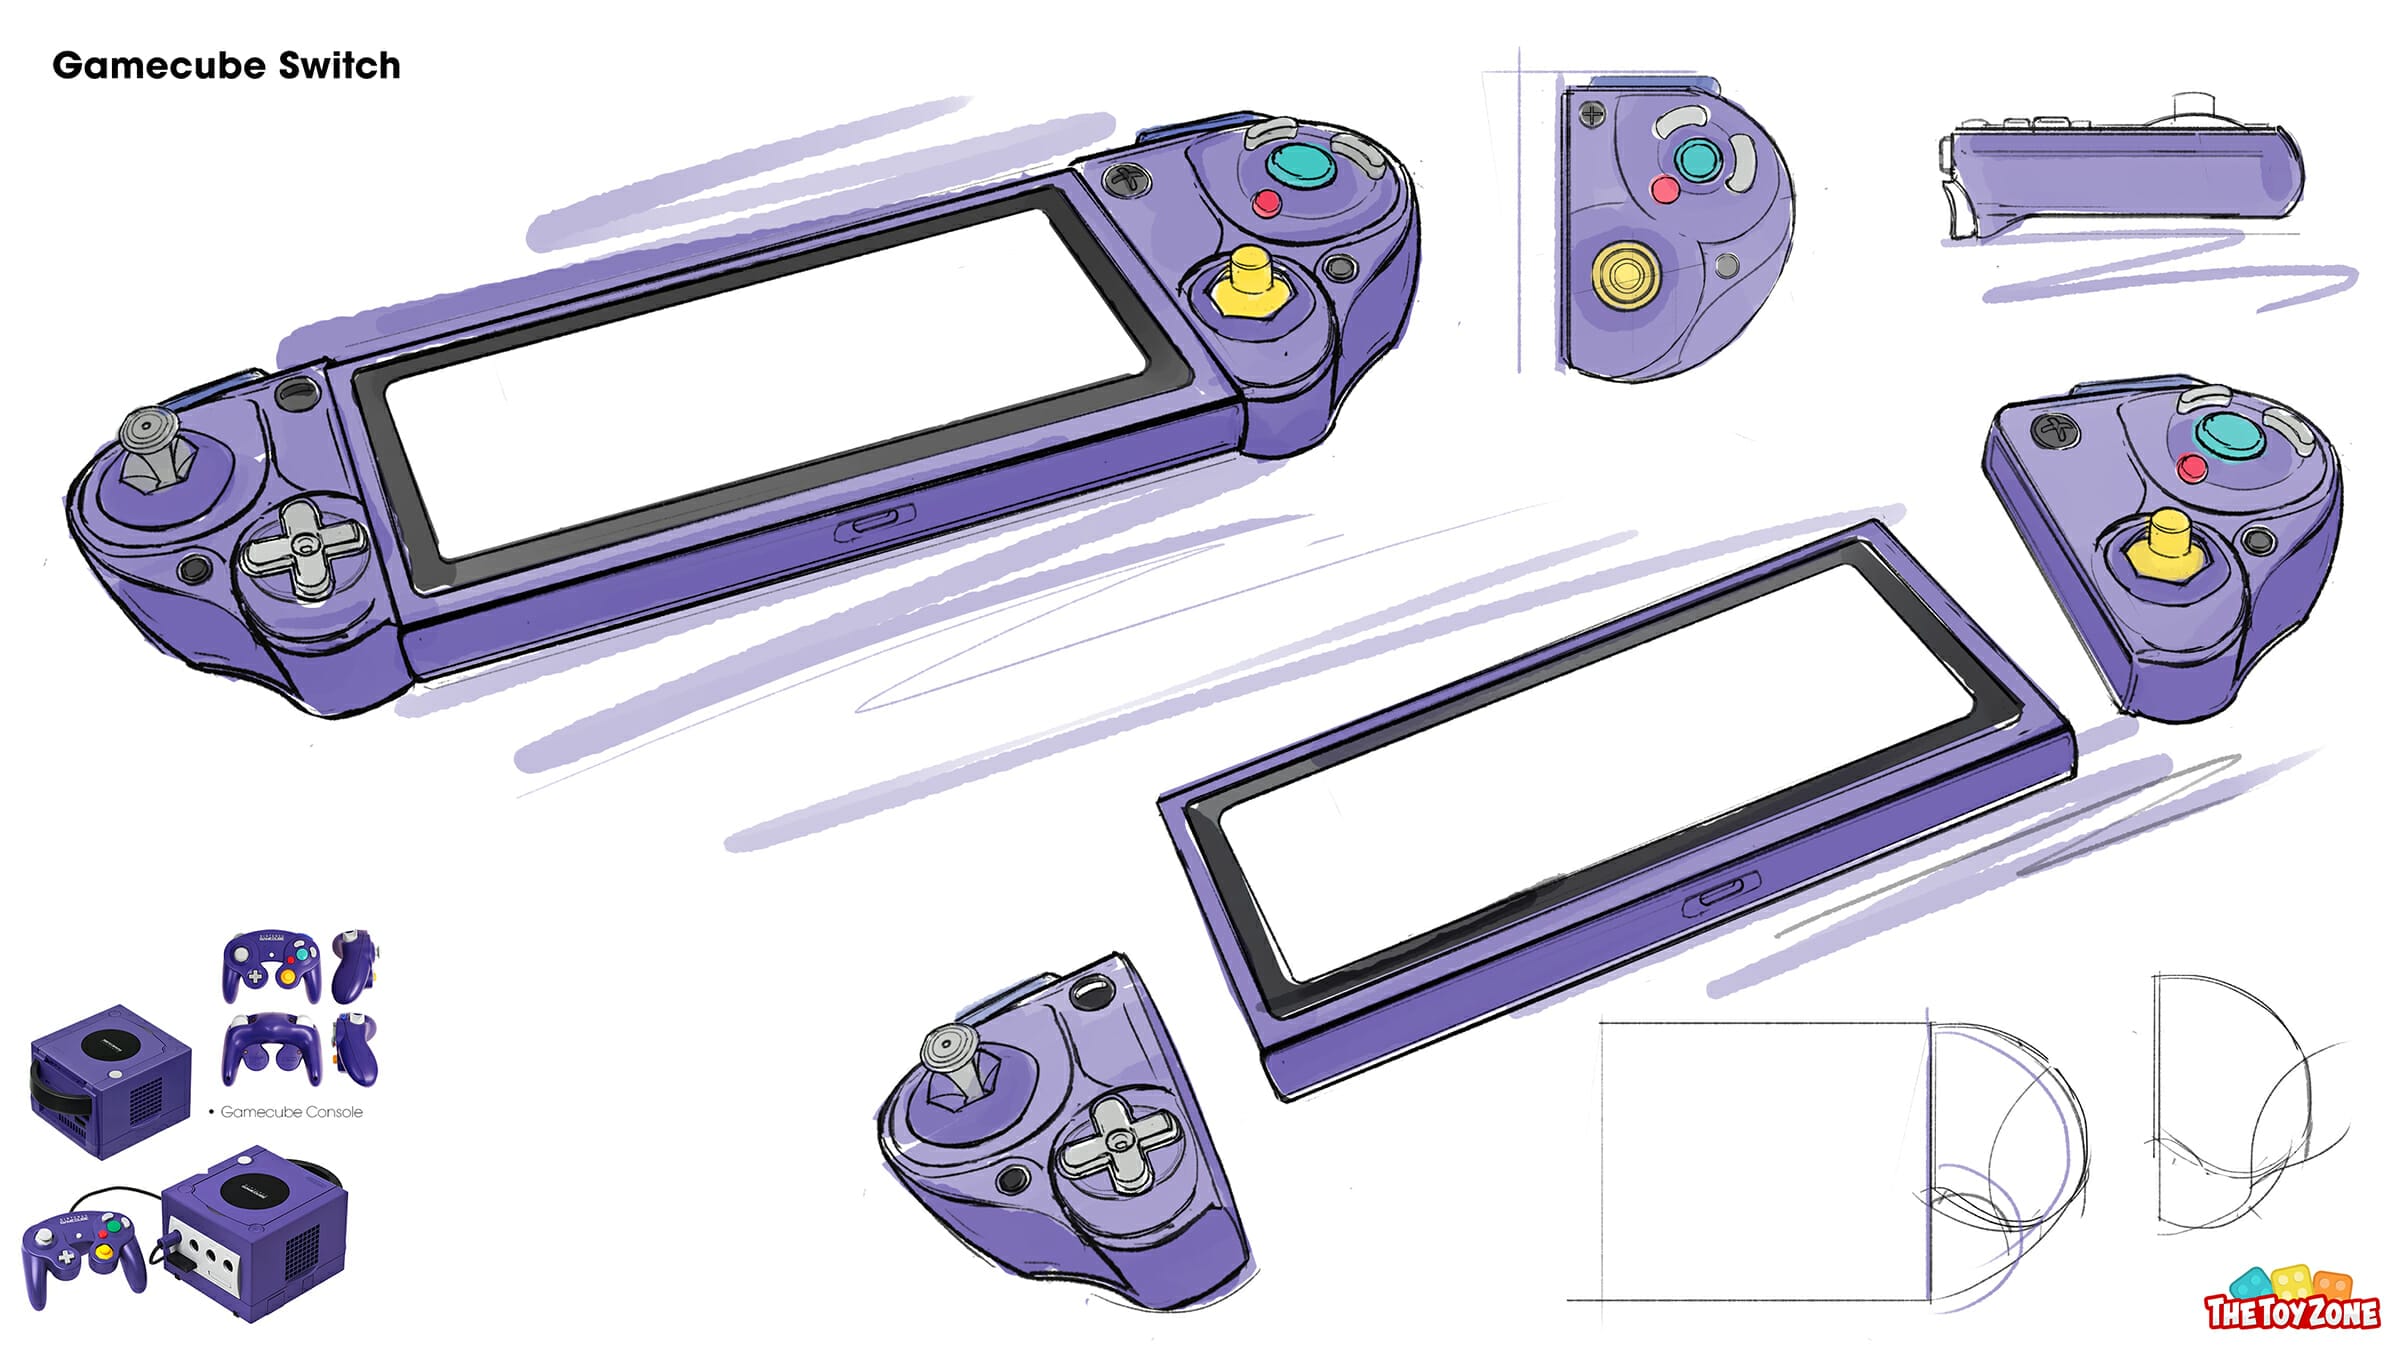 The Gamecube Switch concept art sketch